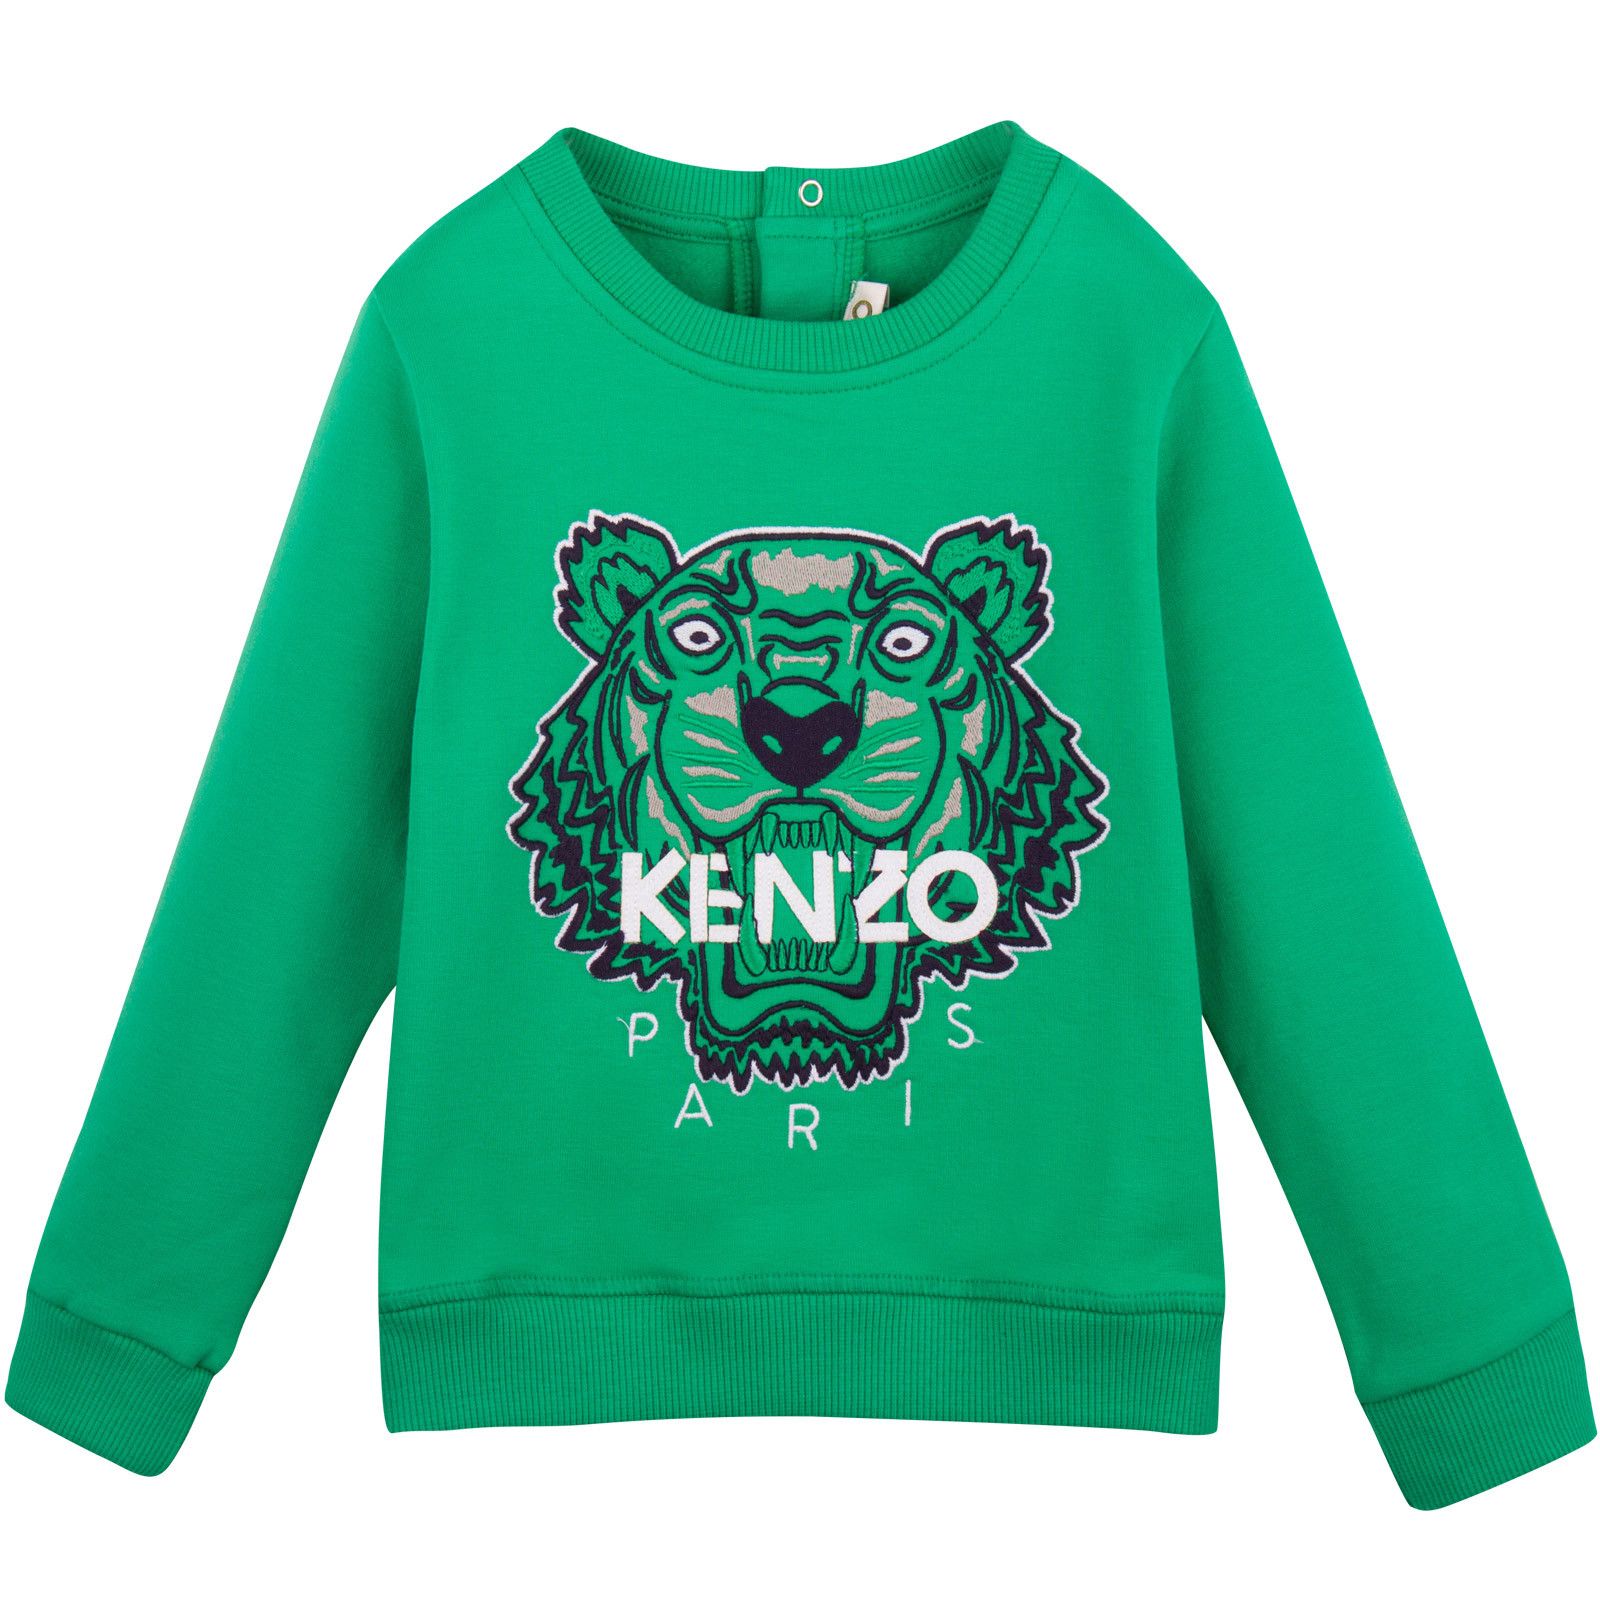 Baby Green Tiger Embroidered Sweatshirt With Buttons - CÉMAROSE | Children's Fashion Store - 1